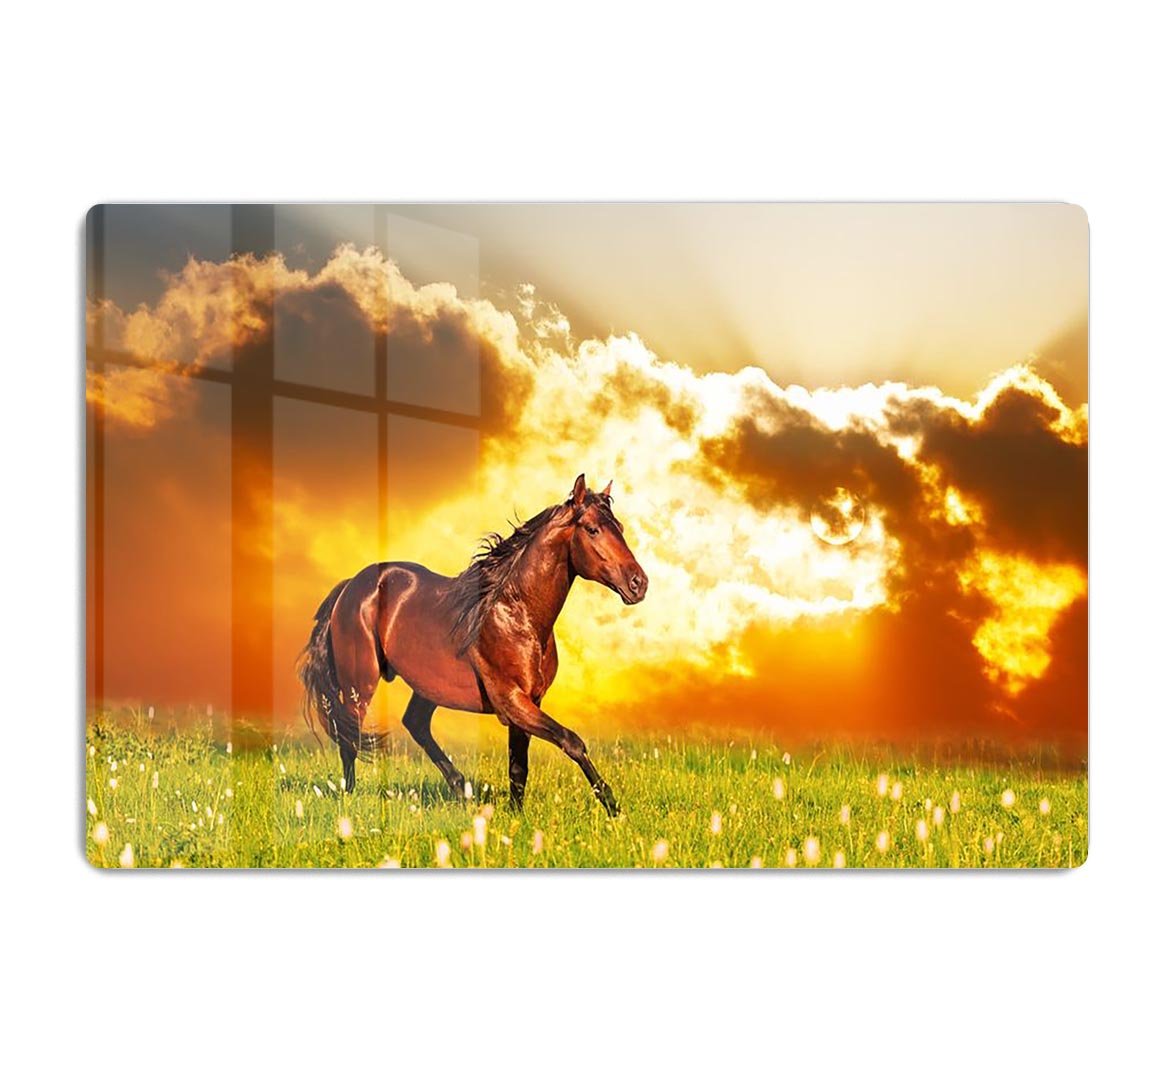 Bay horse skips on a meadow against a sunset HD Metal Print - Canvas Art Rocks - 1